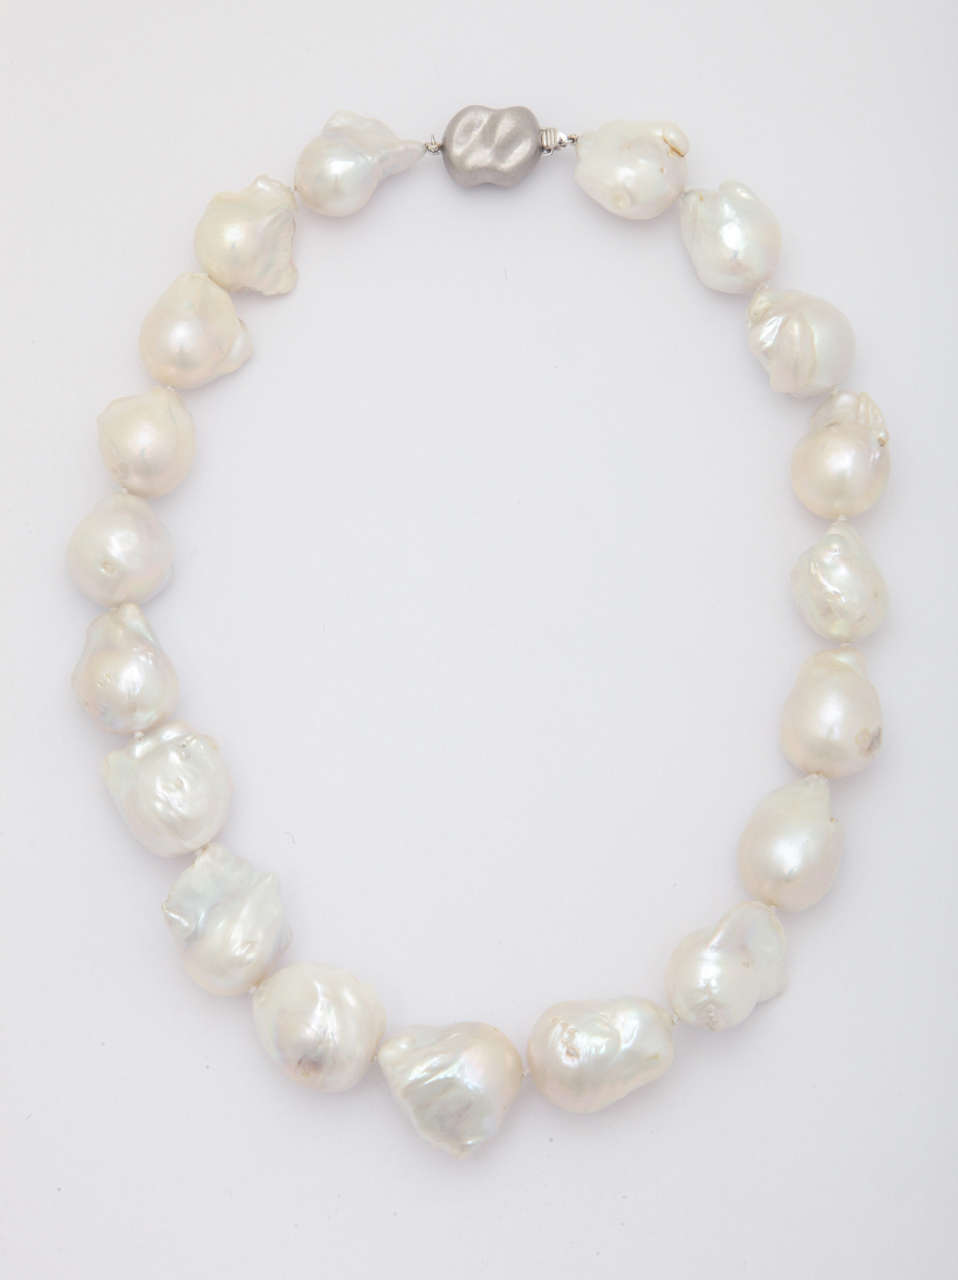 A very impressive pearl necklace consisting of 19 large fresh water baroque pearls 18 x 21 mm in size. The free form shaped clasp is 18 kt white gold. The total length is approximately 18 in. long. Casual enough for day wear and spectacular enough